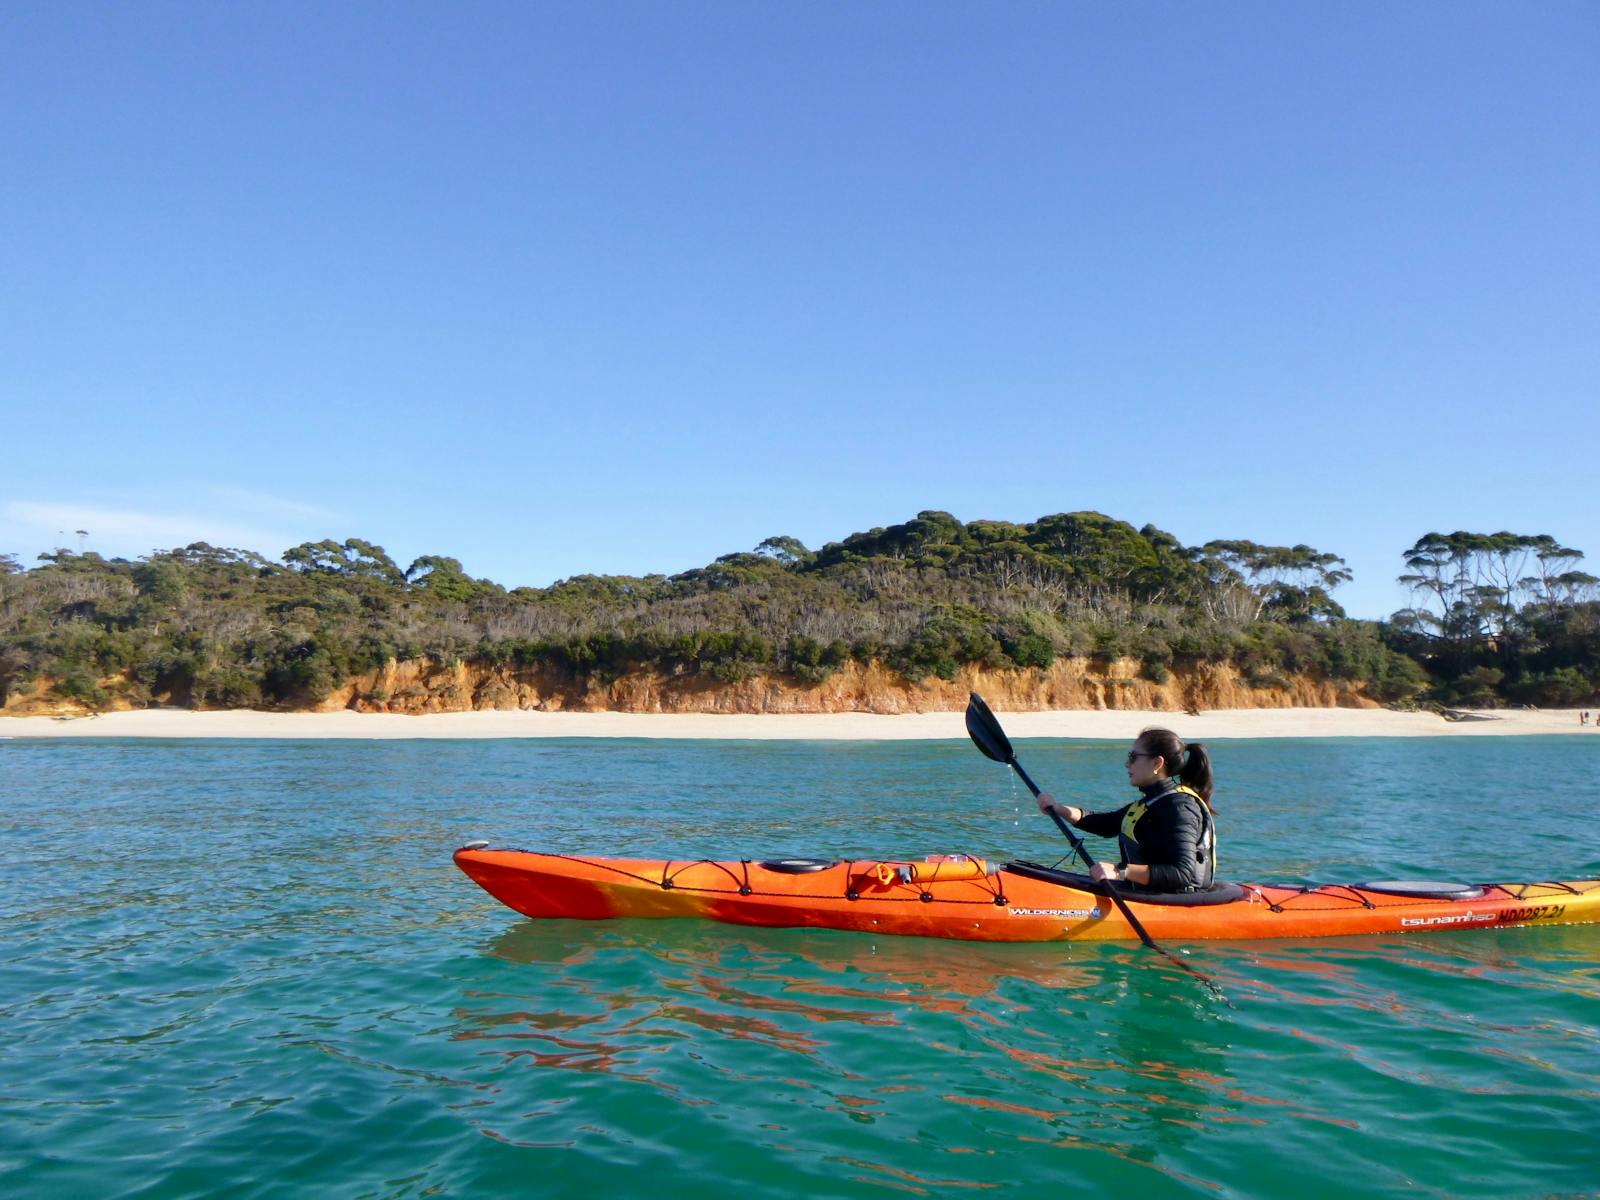 Kayaking at Nelsons beach, Jervis Bay.